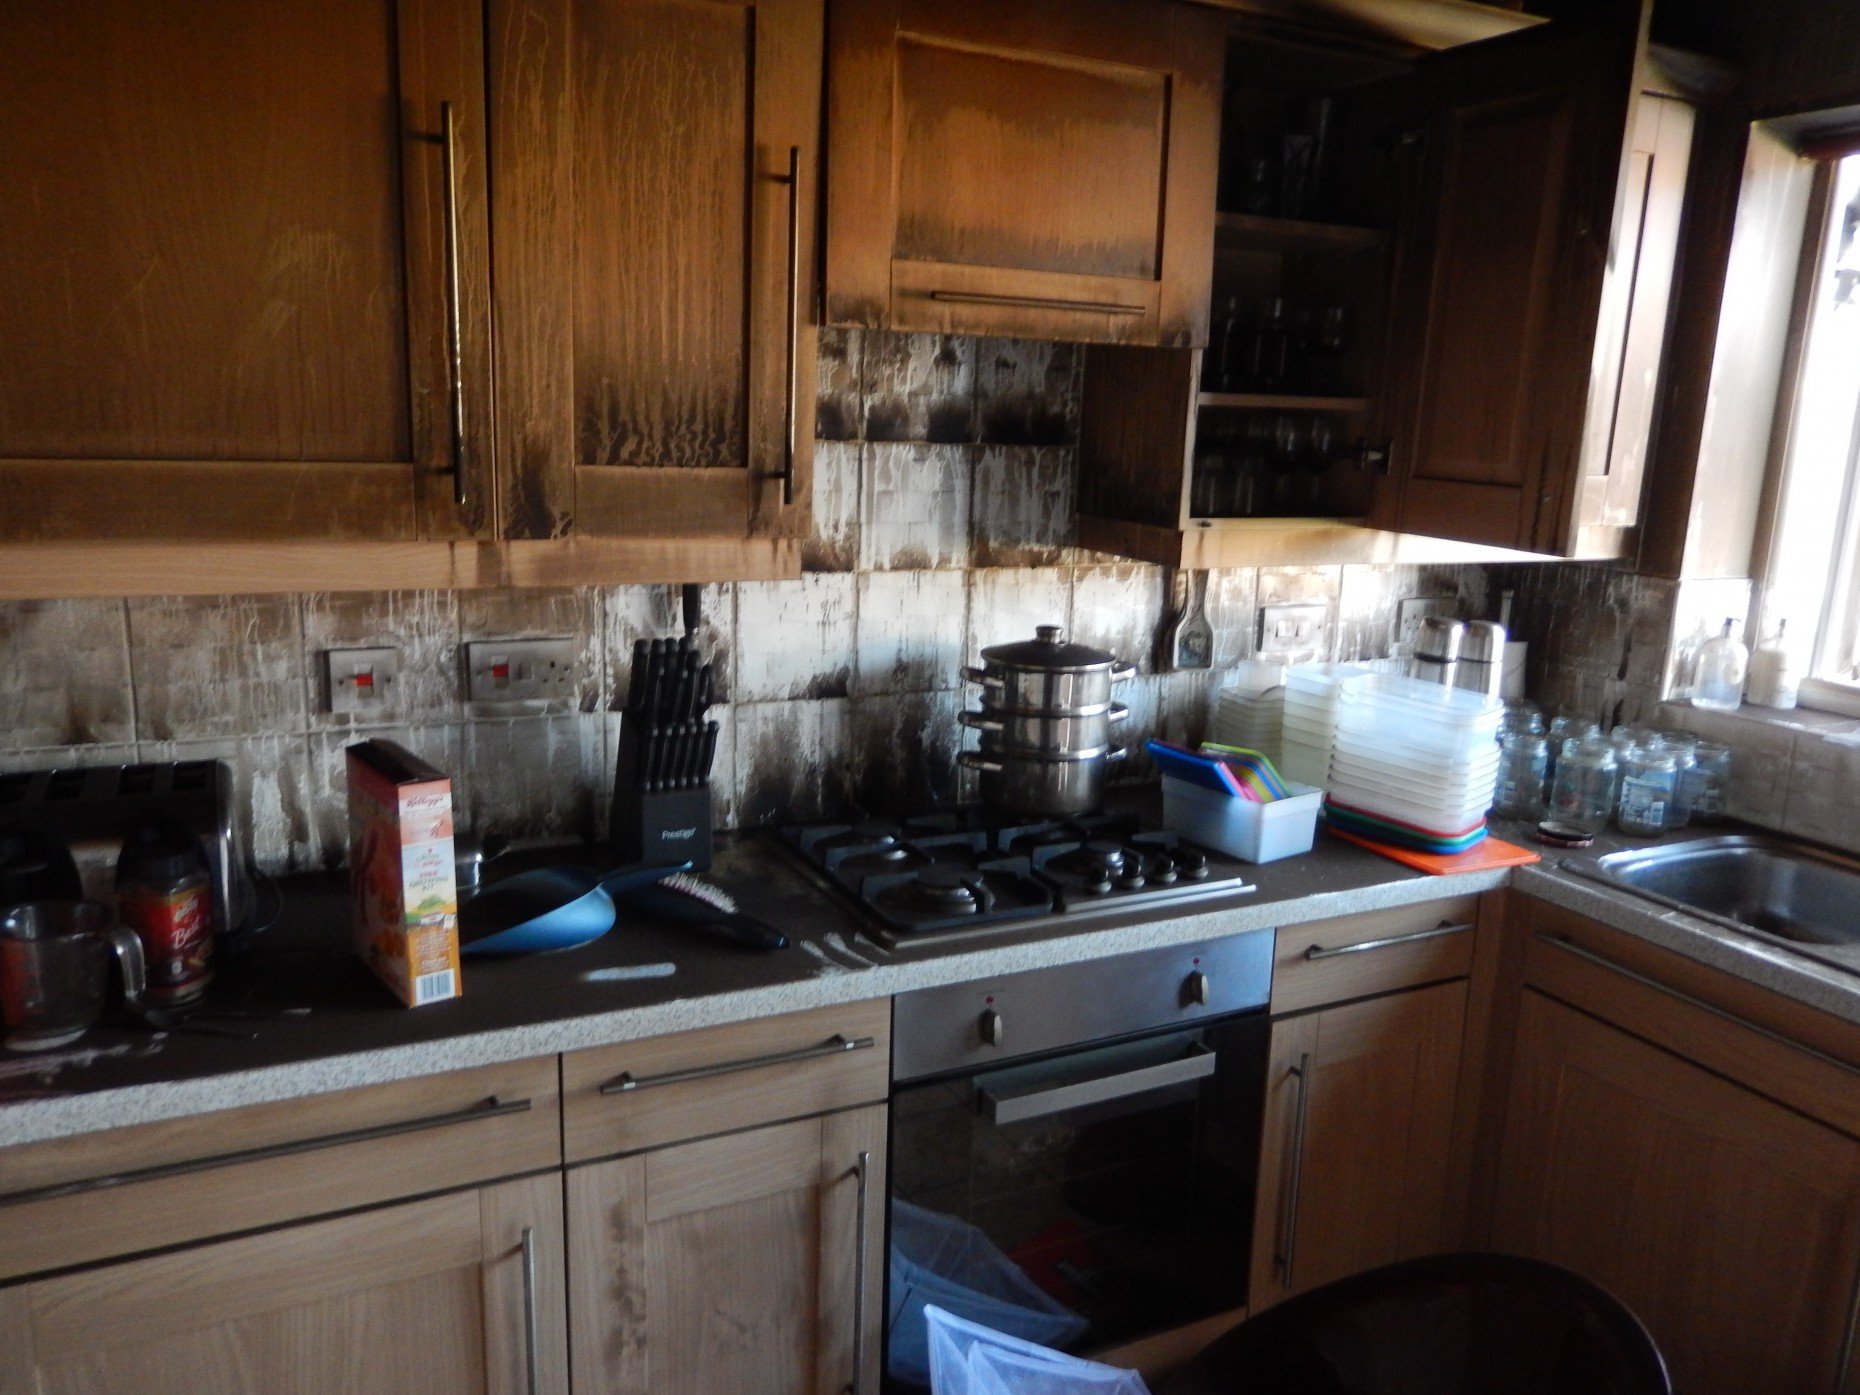 The damage which was caused to their kitchen fortunately did not spread far due to the couple's quick thinking. 